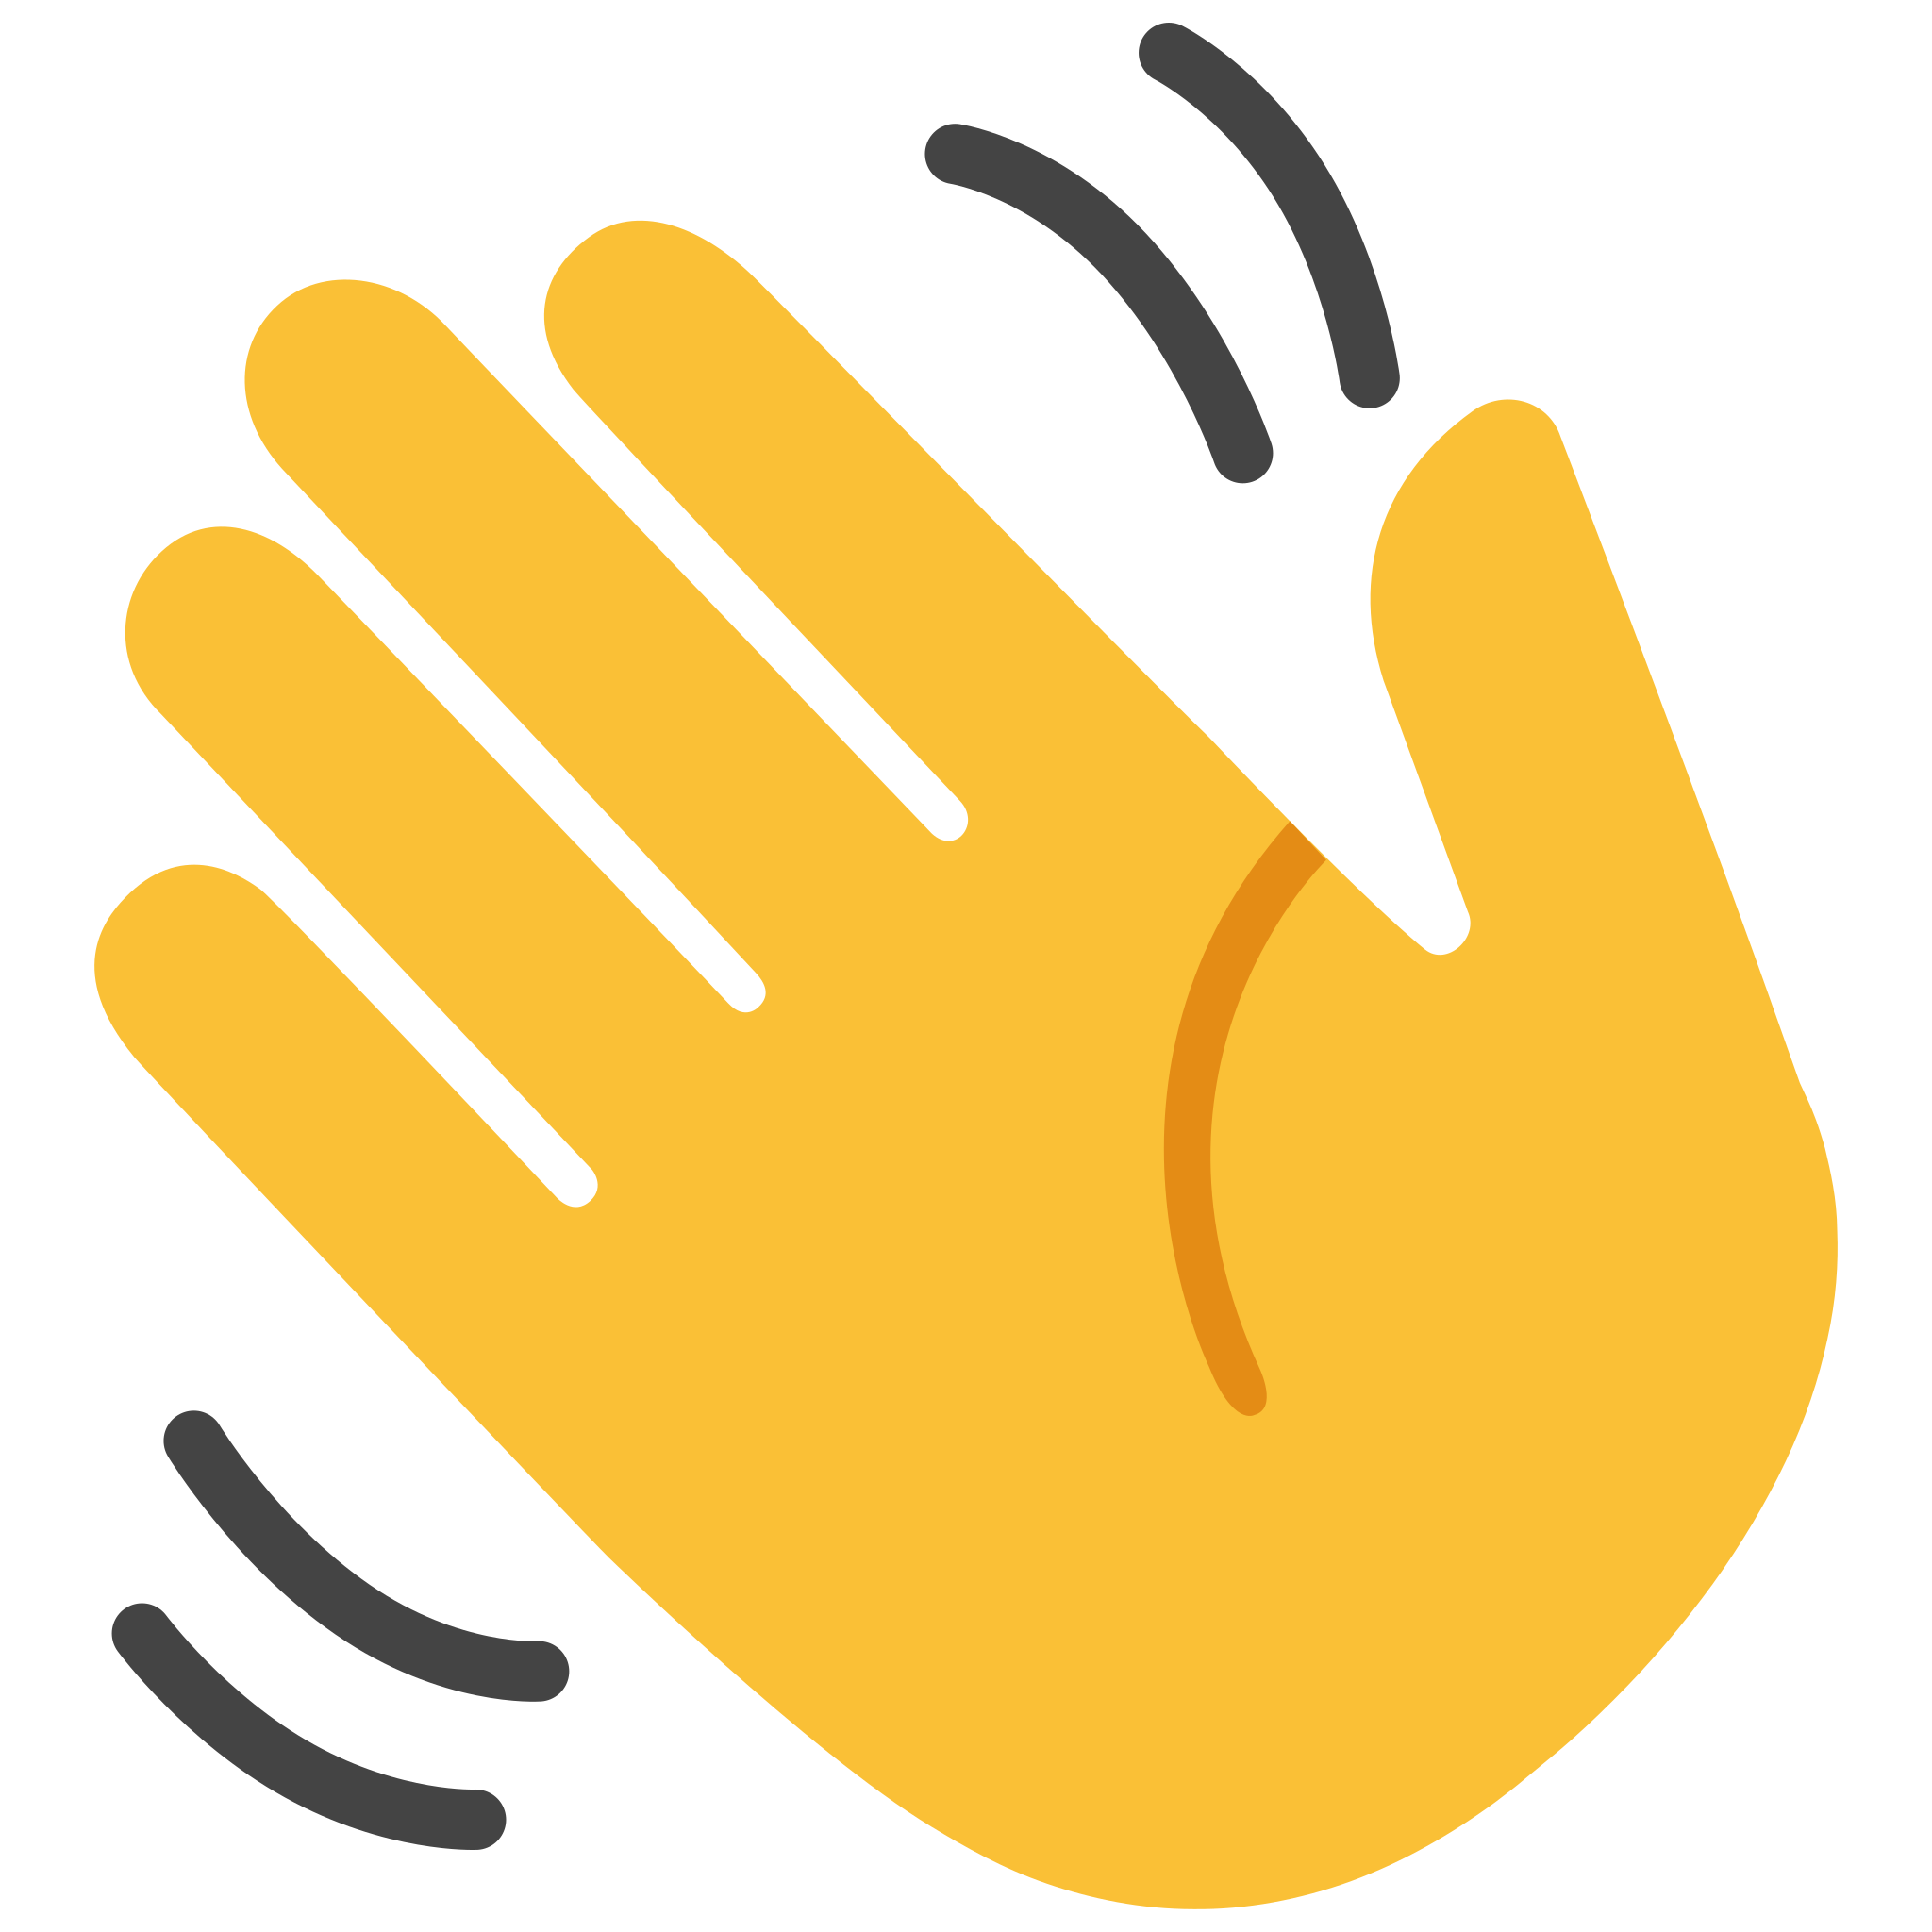 Hand symbol for paper